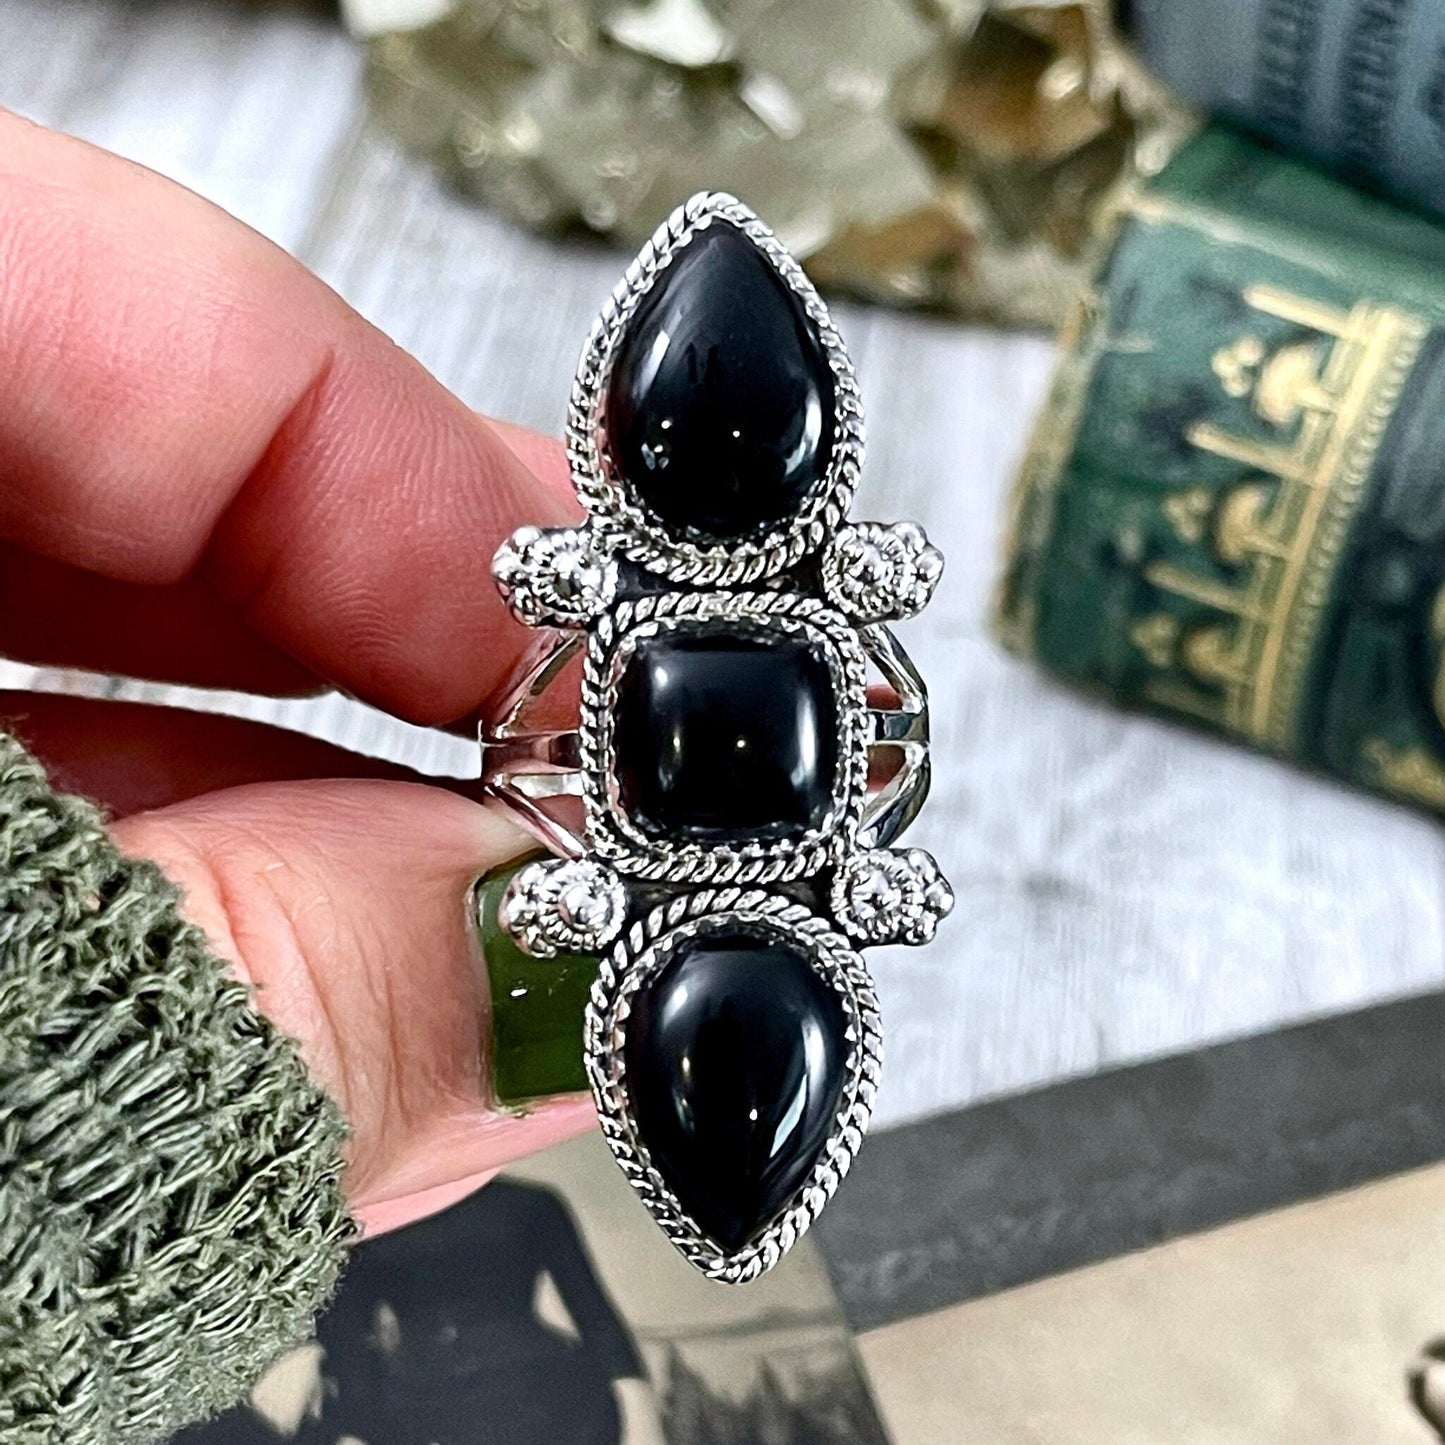 Big Crystal Jewelry, Big Crystal Ring, Big Stone Ring, Black Onyx Jewelry, Black Onyx Ring, Bohemian Ring, Boho Jewelry, Boho Ring, Etsy Id 1185693990, Foxlark Alchemy, Foxlark- Rings, Gift For Woman, Gypsy Ring, Jewelry, Rings, Statement Rings